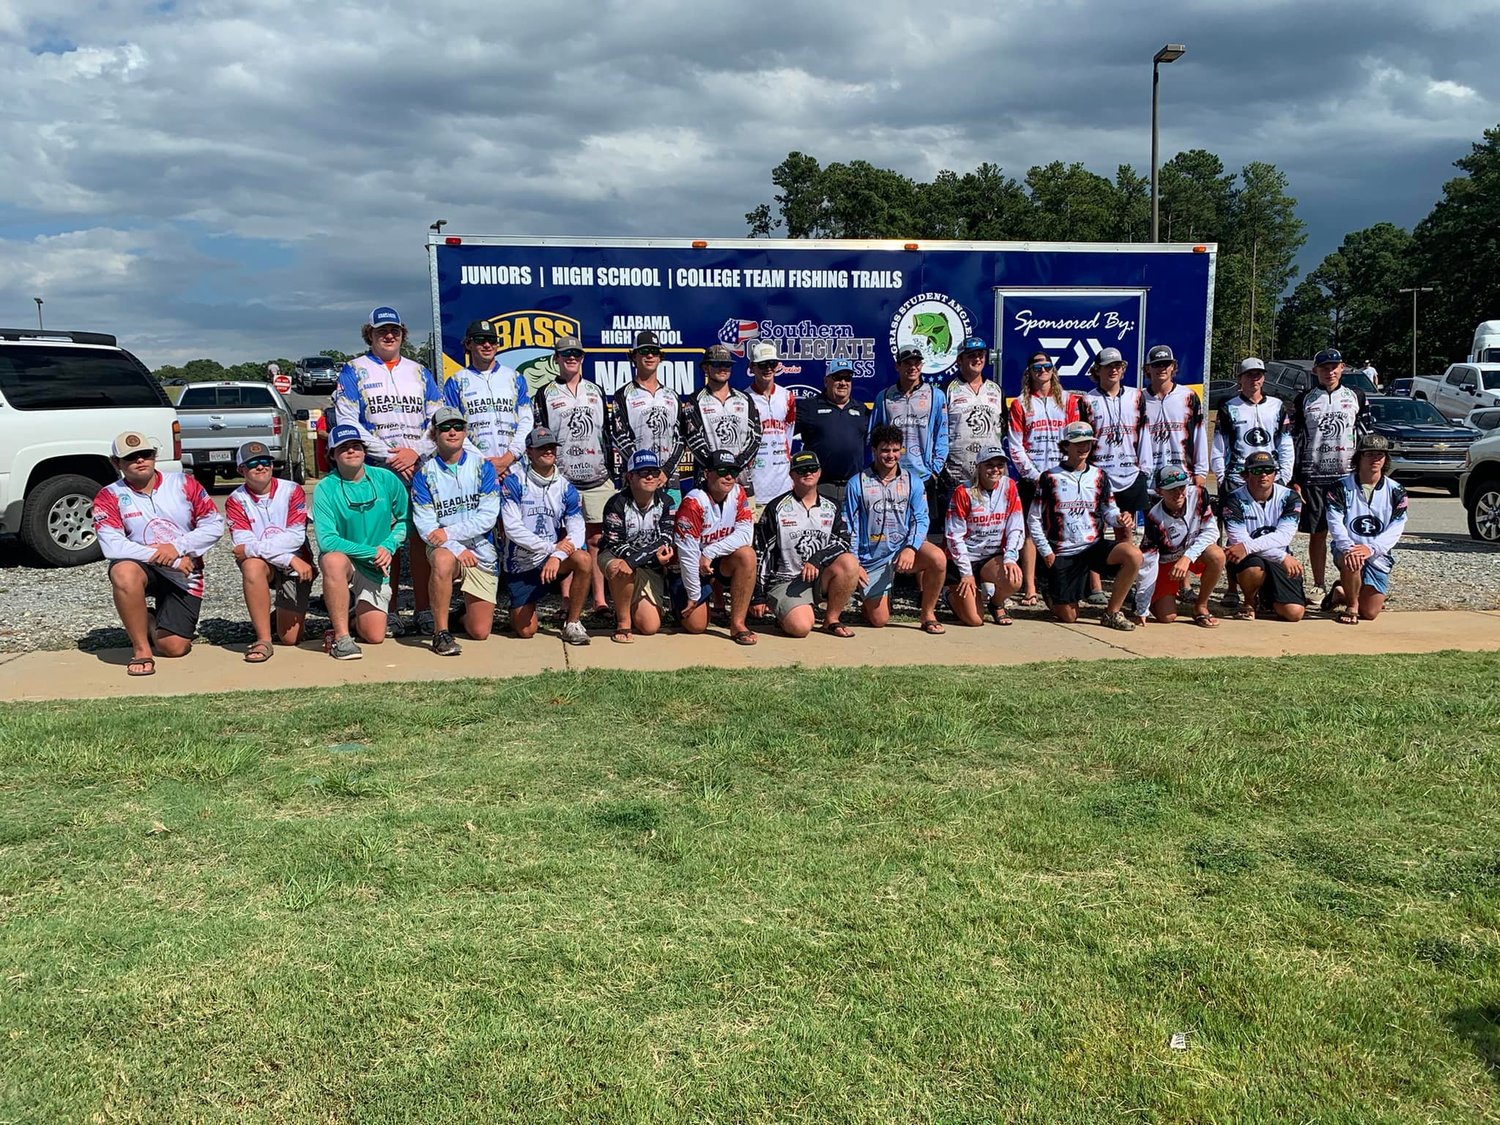 Four of Alabama’s 35 teams at the Bassmaster High School National Championship were representing Baldwin County High School in South Carolina earlier in August.